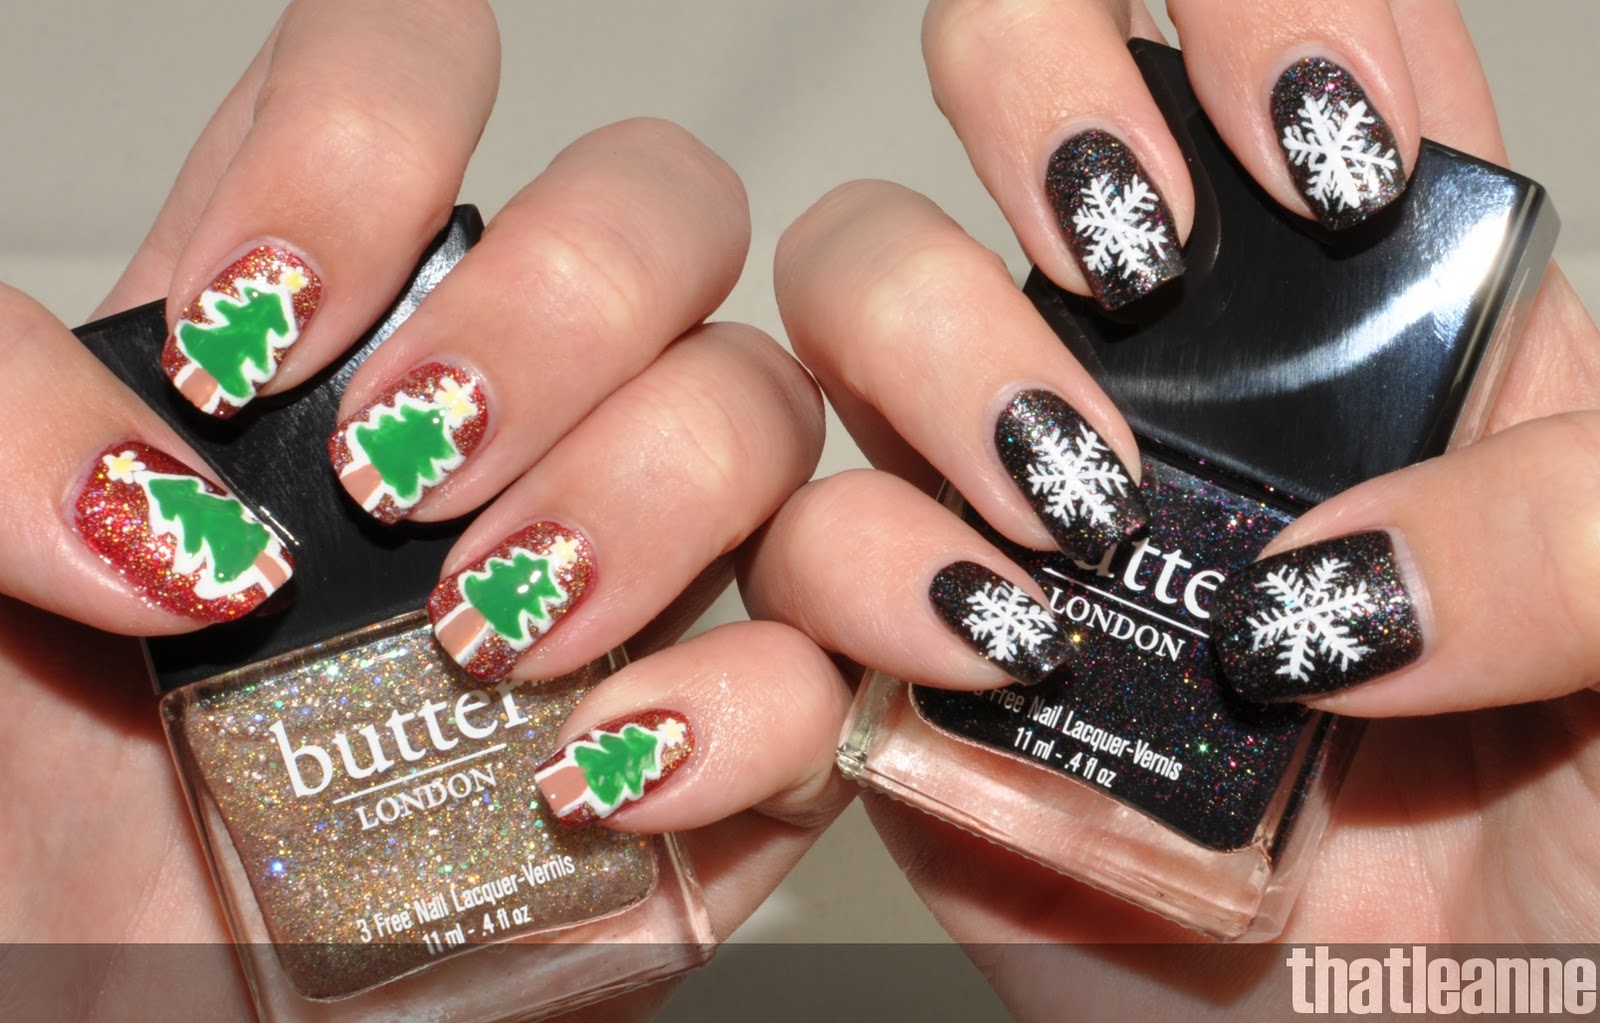 I'd share with you these two simple nail art ideas for the holidays!